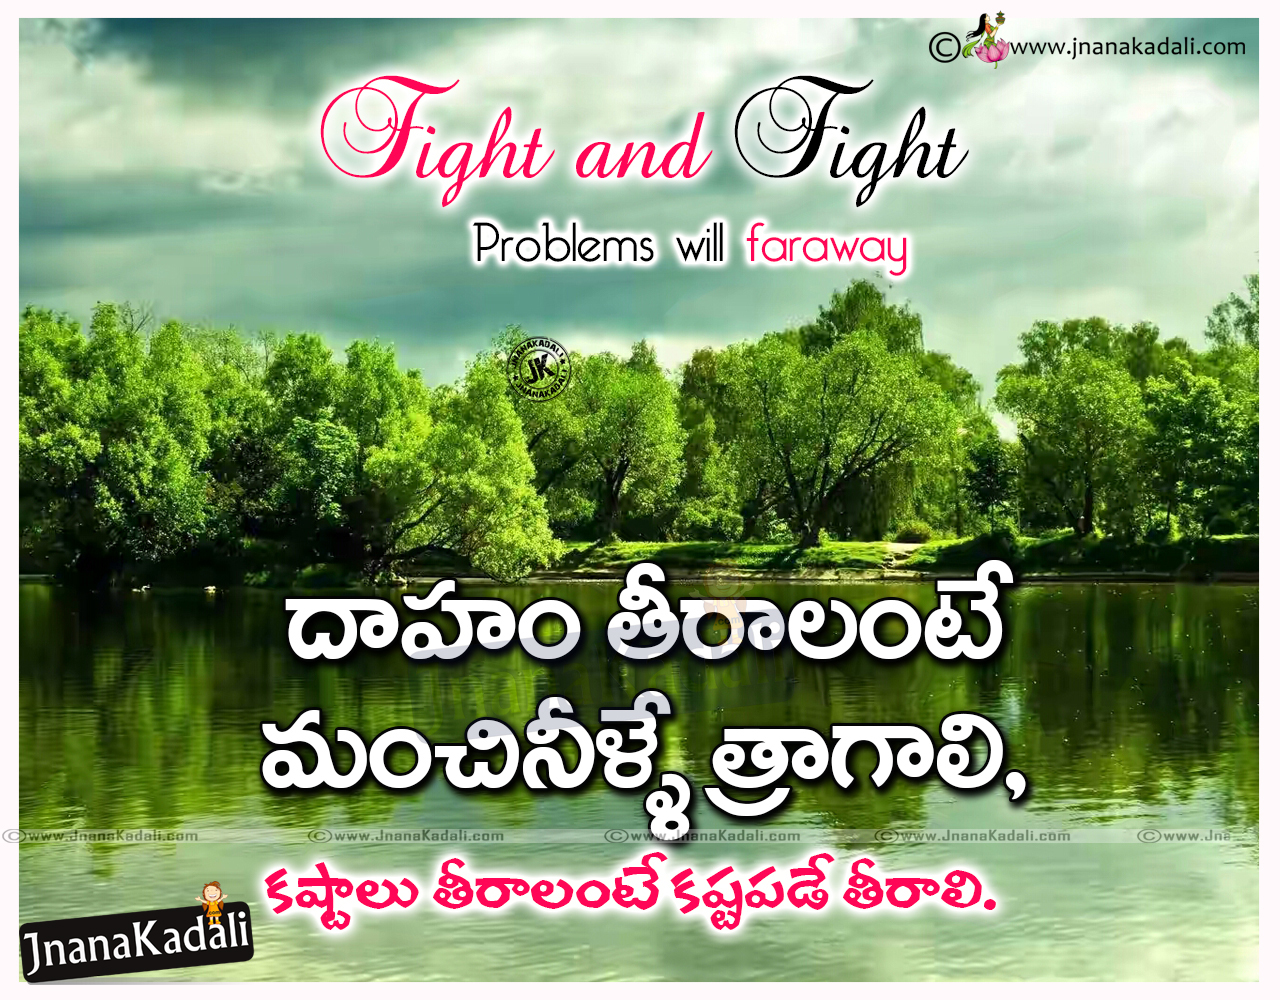 Best Inspirational Telugu life Stories Quotes for Daily Telugu Good Quotes images online Latest Telugu Problems Message Lines in Telugu